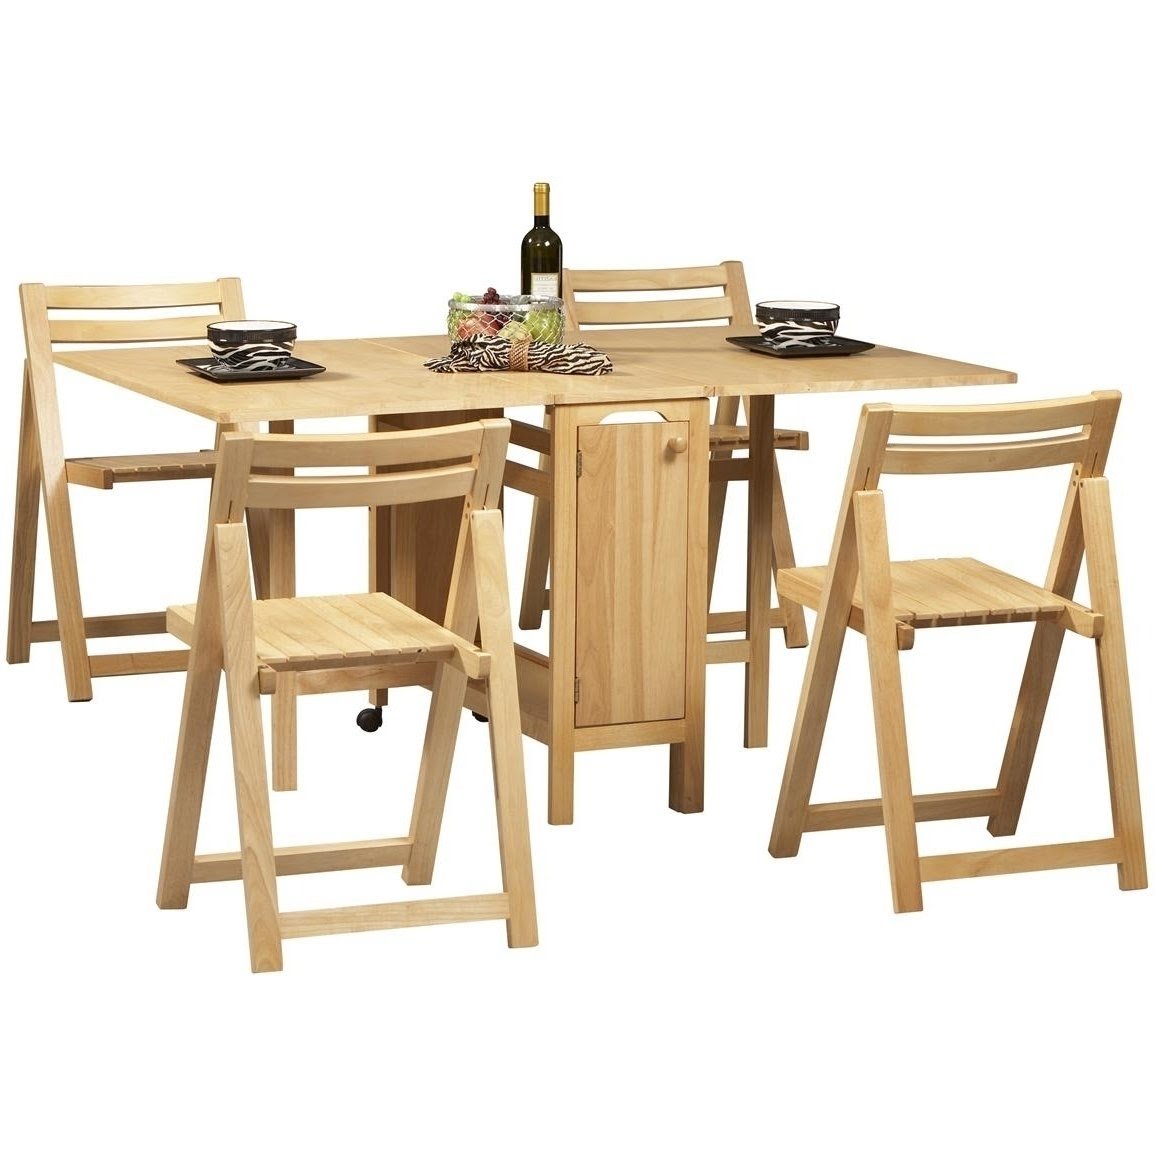 fold down table and chairs